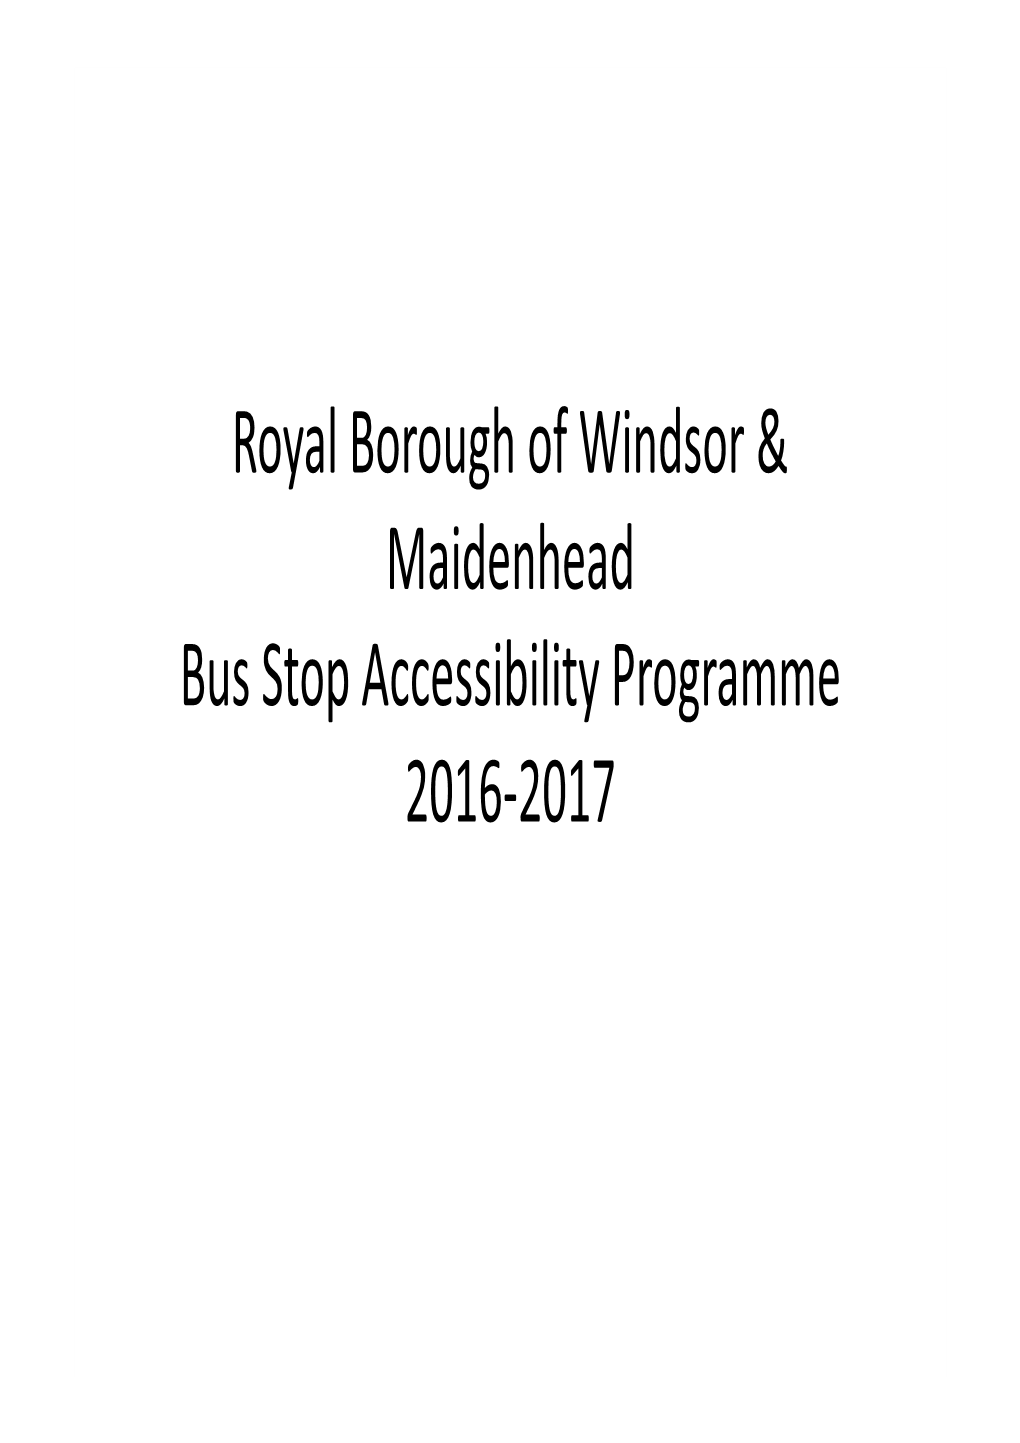 Royal Borough of Windsor & Maidenhead Bus Stop Accessibility